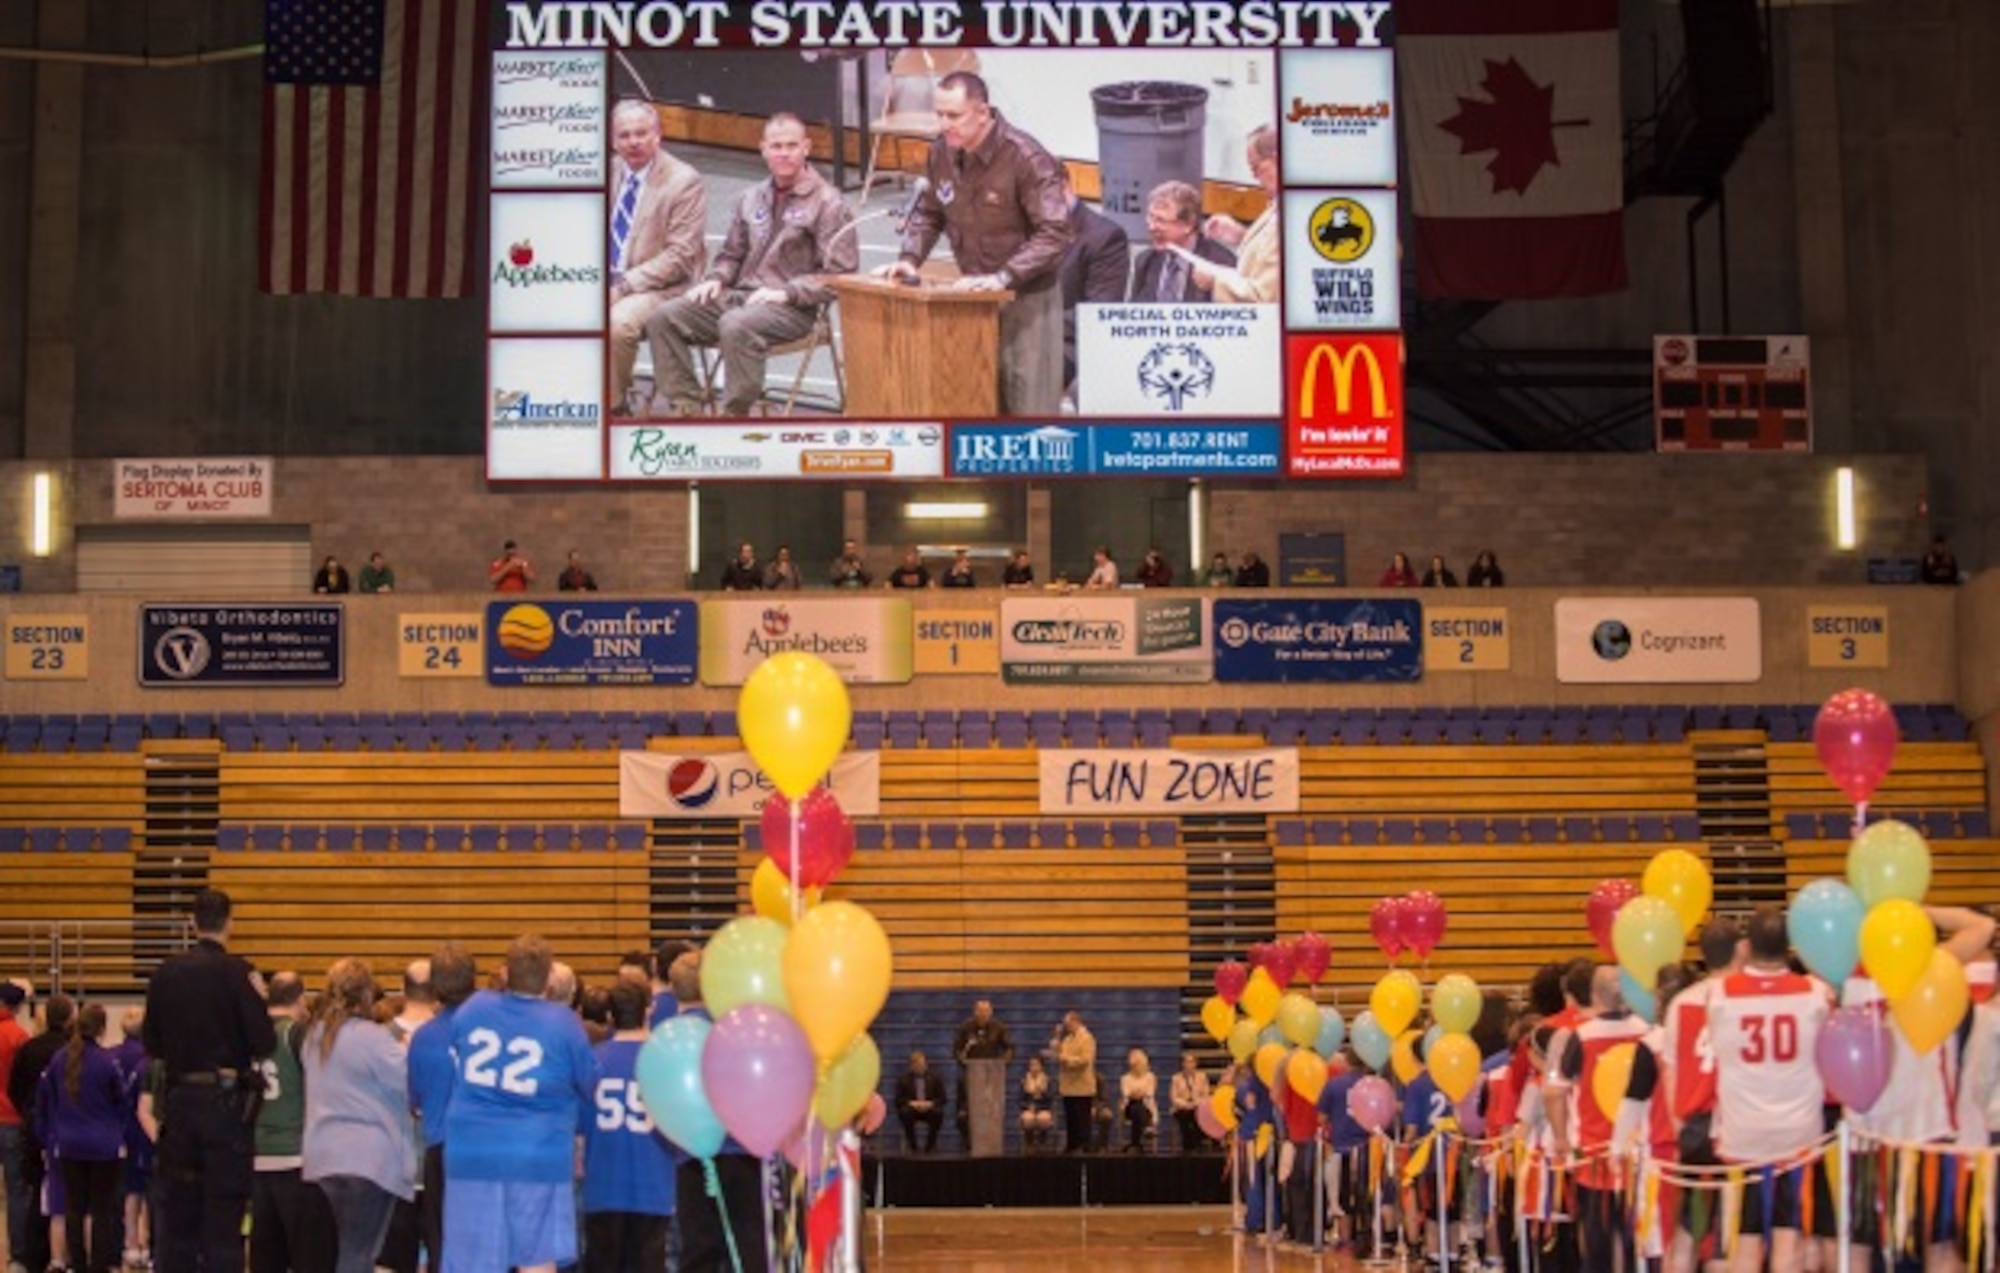 Col. David Ballew, 5th Bomb Wing vice commander, speaks during the pre-game ceremonies on behalf of Minot Air Force Base at the North Dakota Special Olympics in Minot, N.D., March 4, 2016. Col. Ballew and Col. Michael Lutton, 91st Missile Wing commander, among other Minot AFB members volunteered to help at the Special Olympics. (U.S. Air Force photo/Airman 1st Class Christian Sullivan)